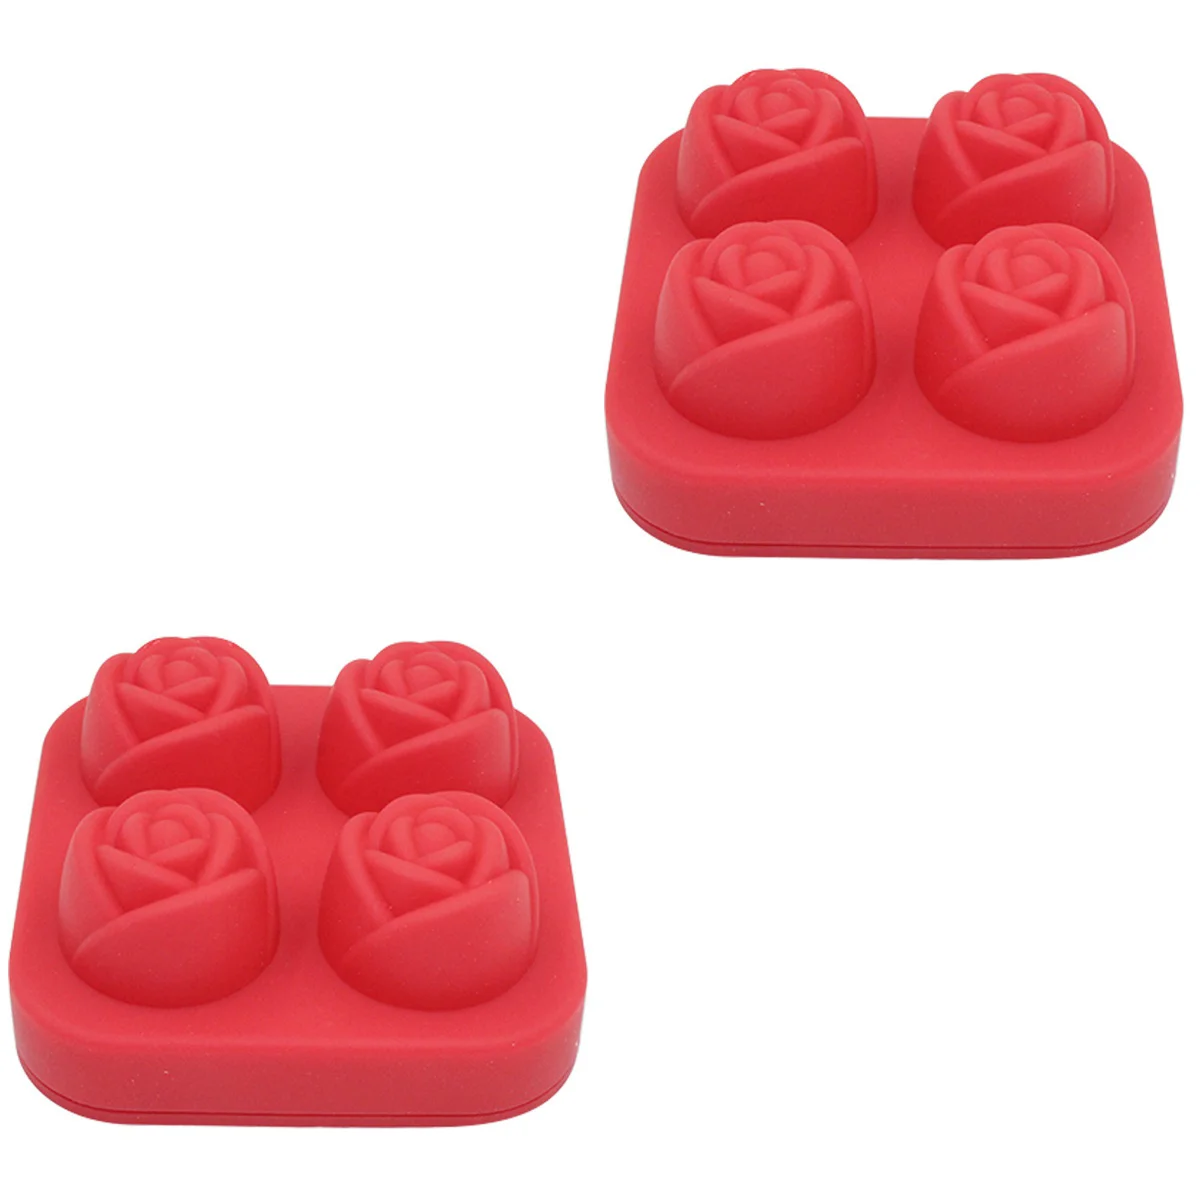 

2pcs 4 Cavity Rose Flower Shaped Silicone DIY Chocolate Candy Cupcake Jelly Baking Mould Mold Ice Cube Tray 8.8x8.8x3.8cm (Red)